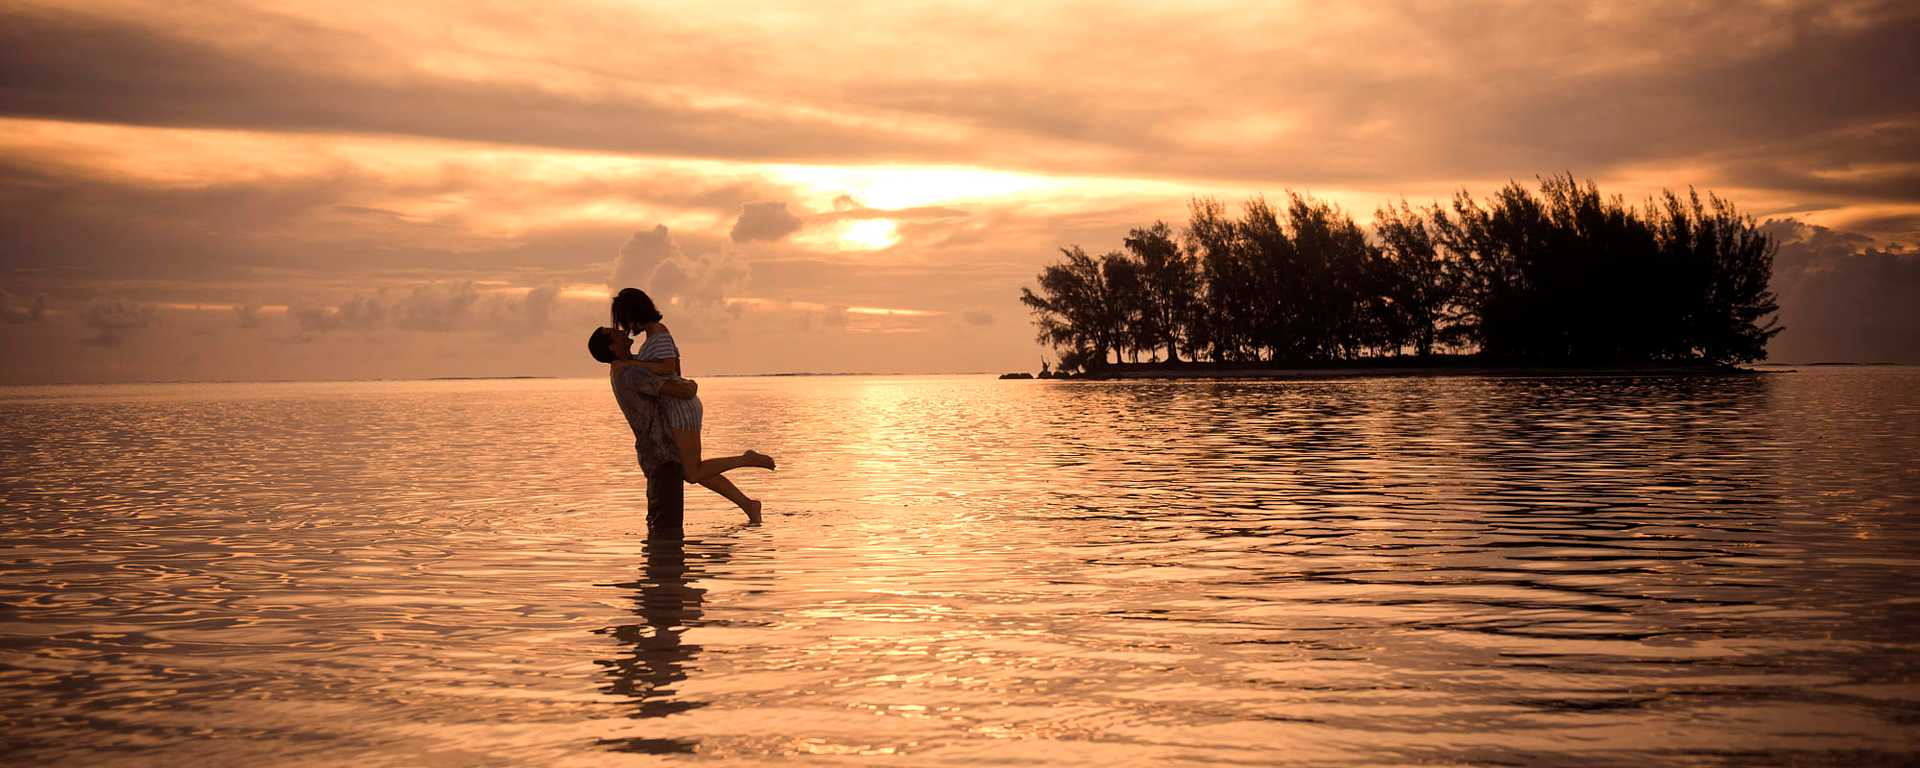 Honeymoon couple on the beach at sunset in Moorea, French Polynesia